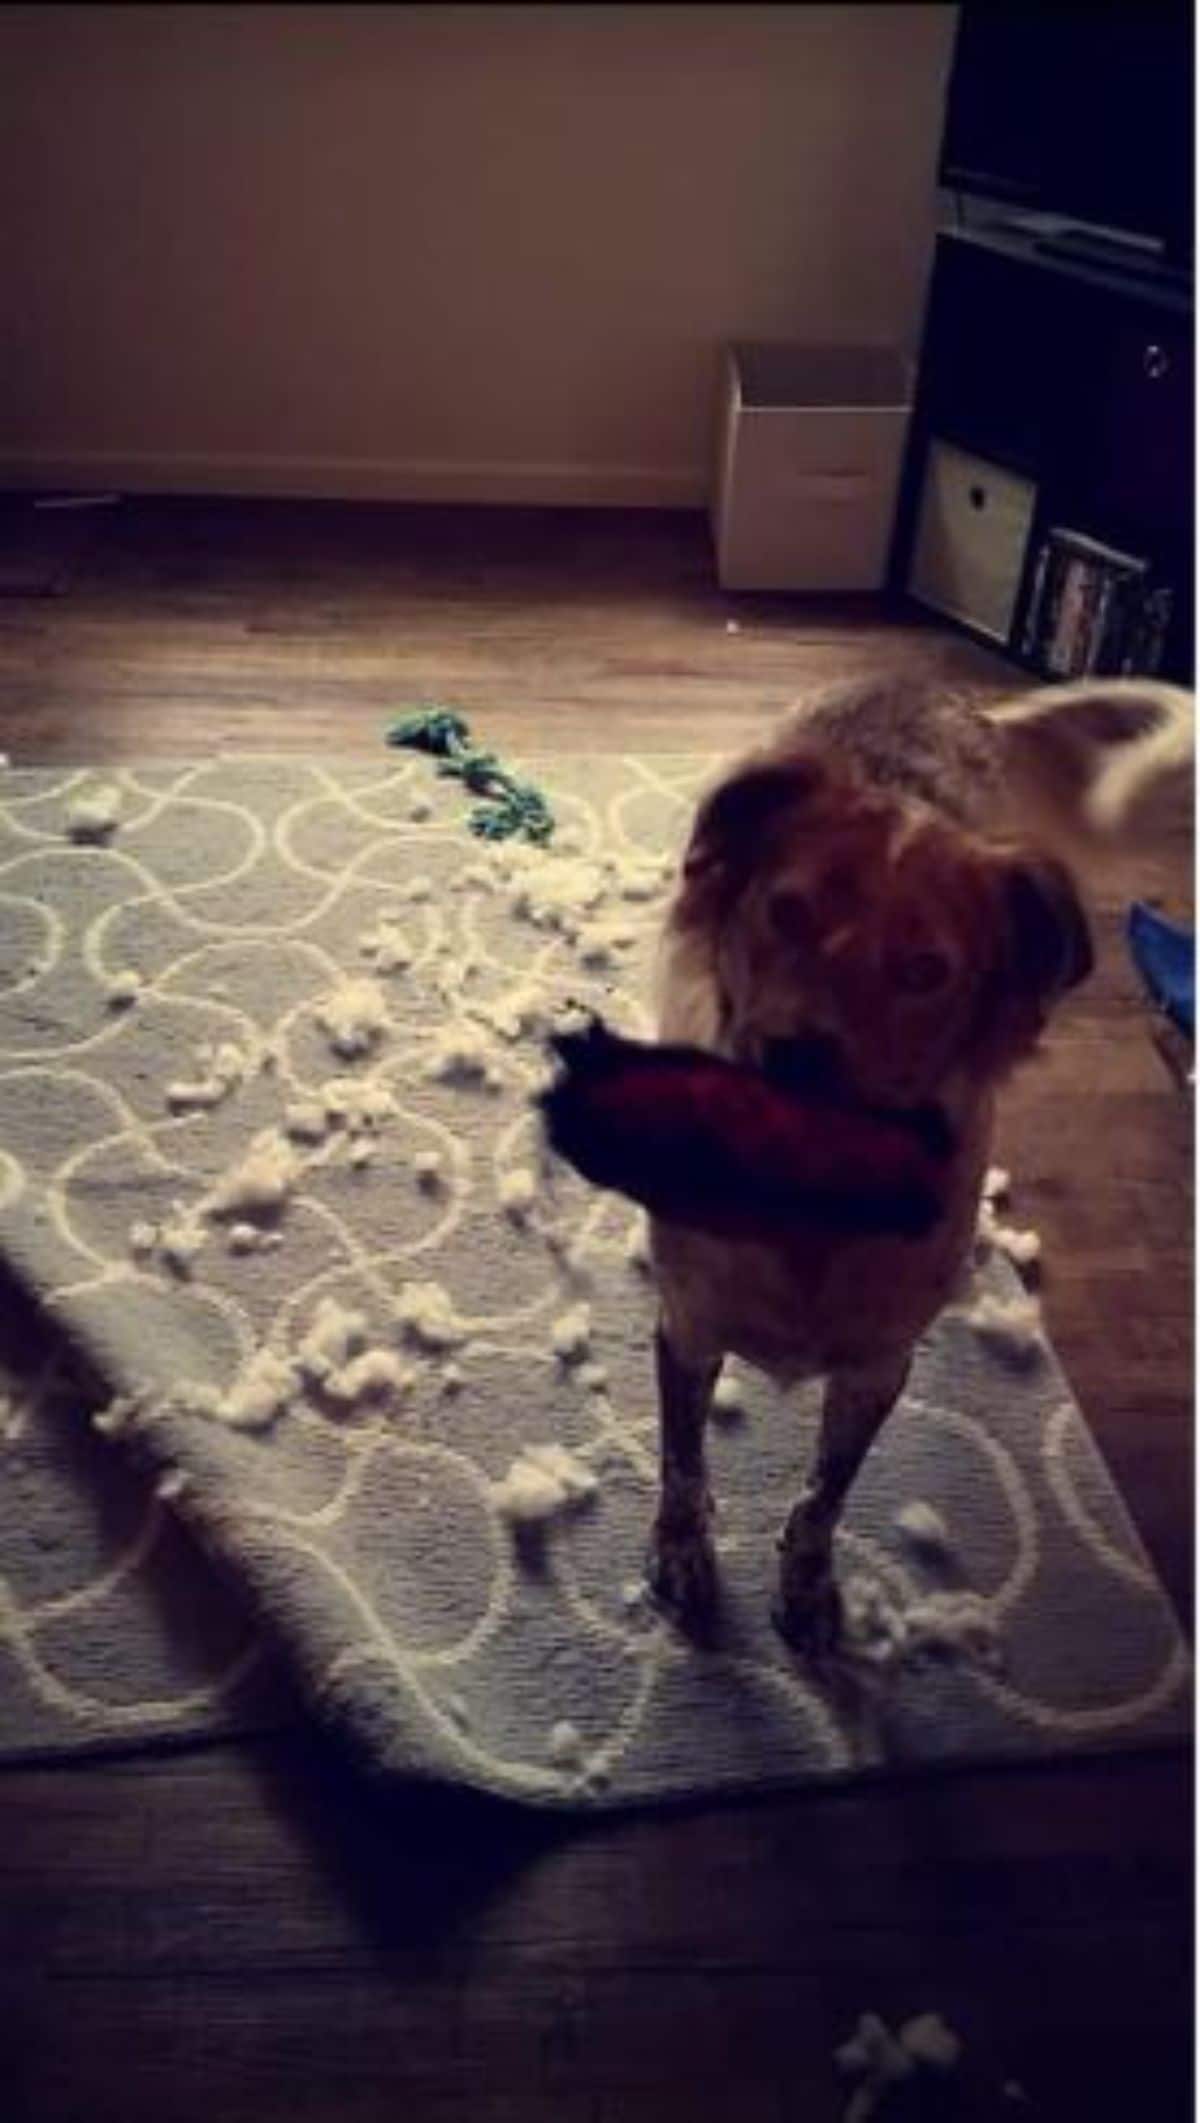 brown dog holding a ripped up toy with stuffing on the floor